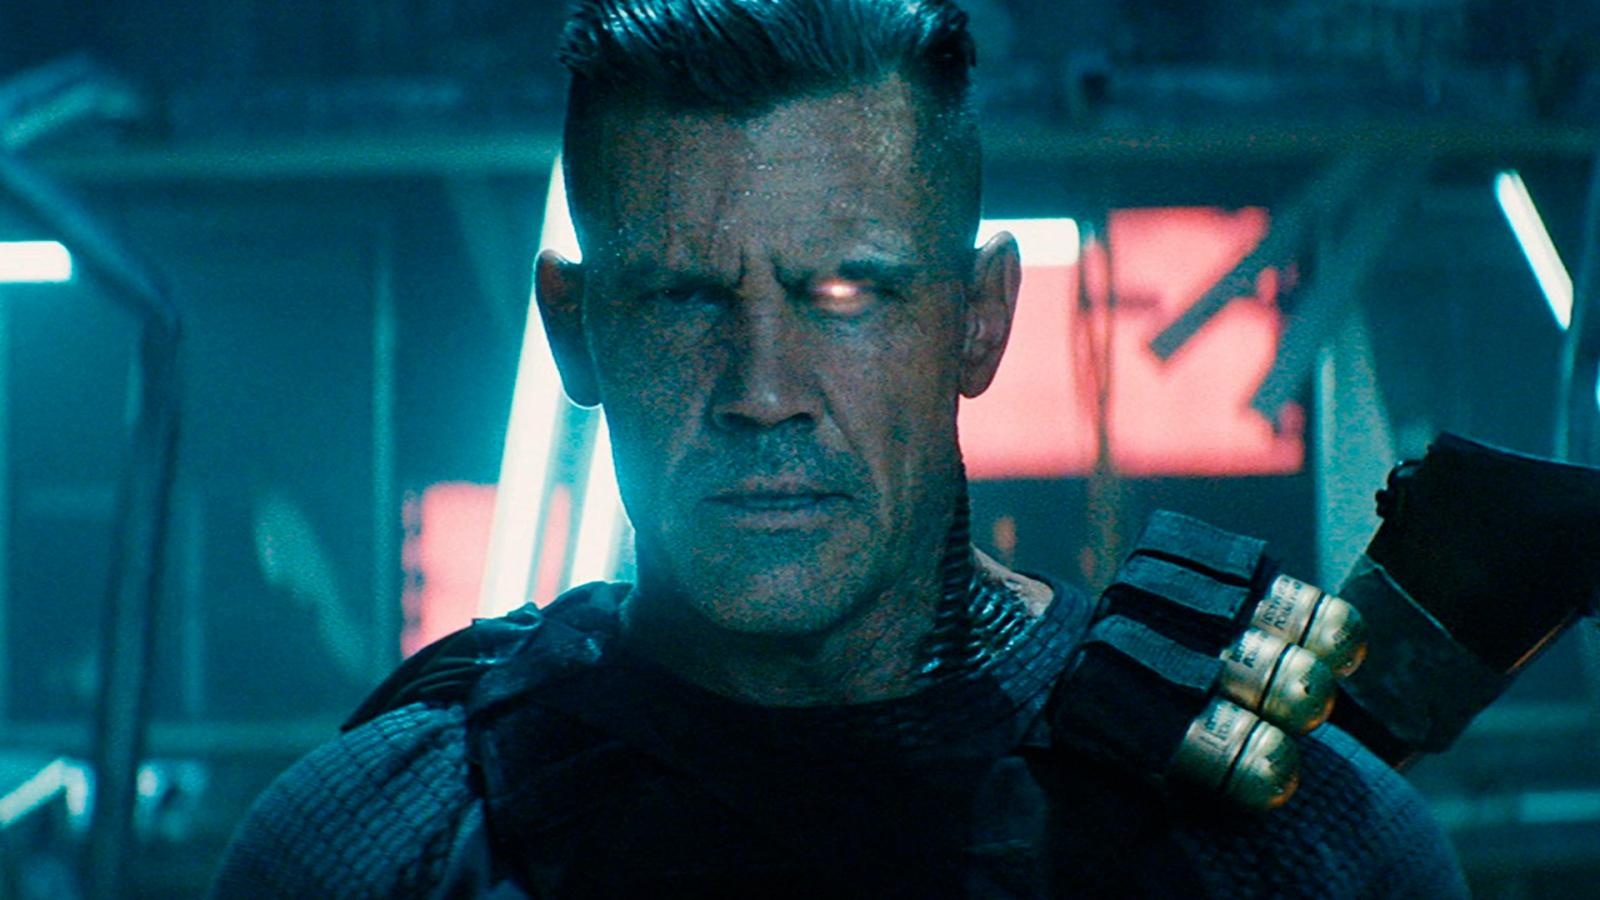 Brad Pitt Was Supposed to Have a Much Larger Role in Deadpool 2 Than His Two-Second Cameo - image 1